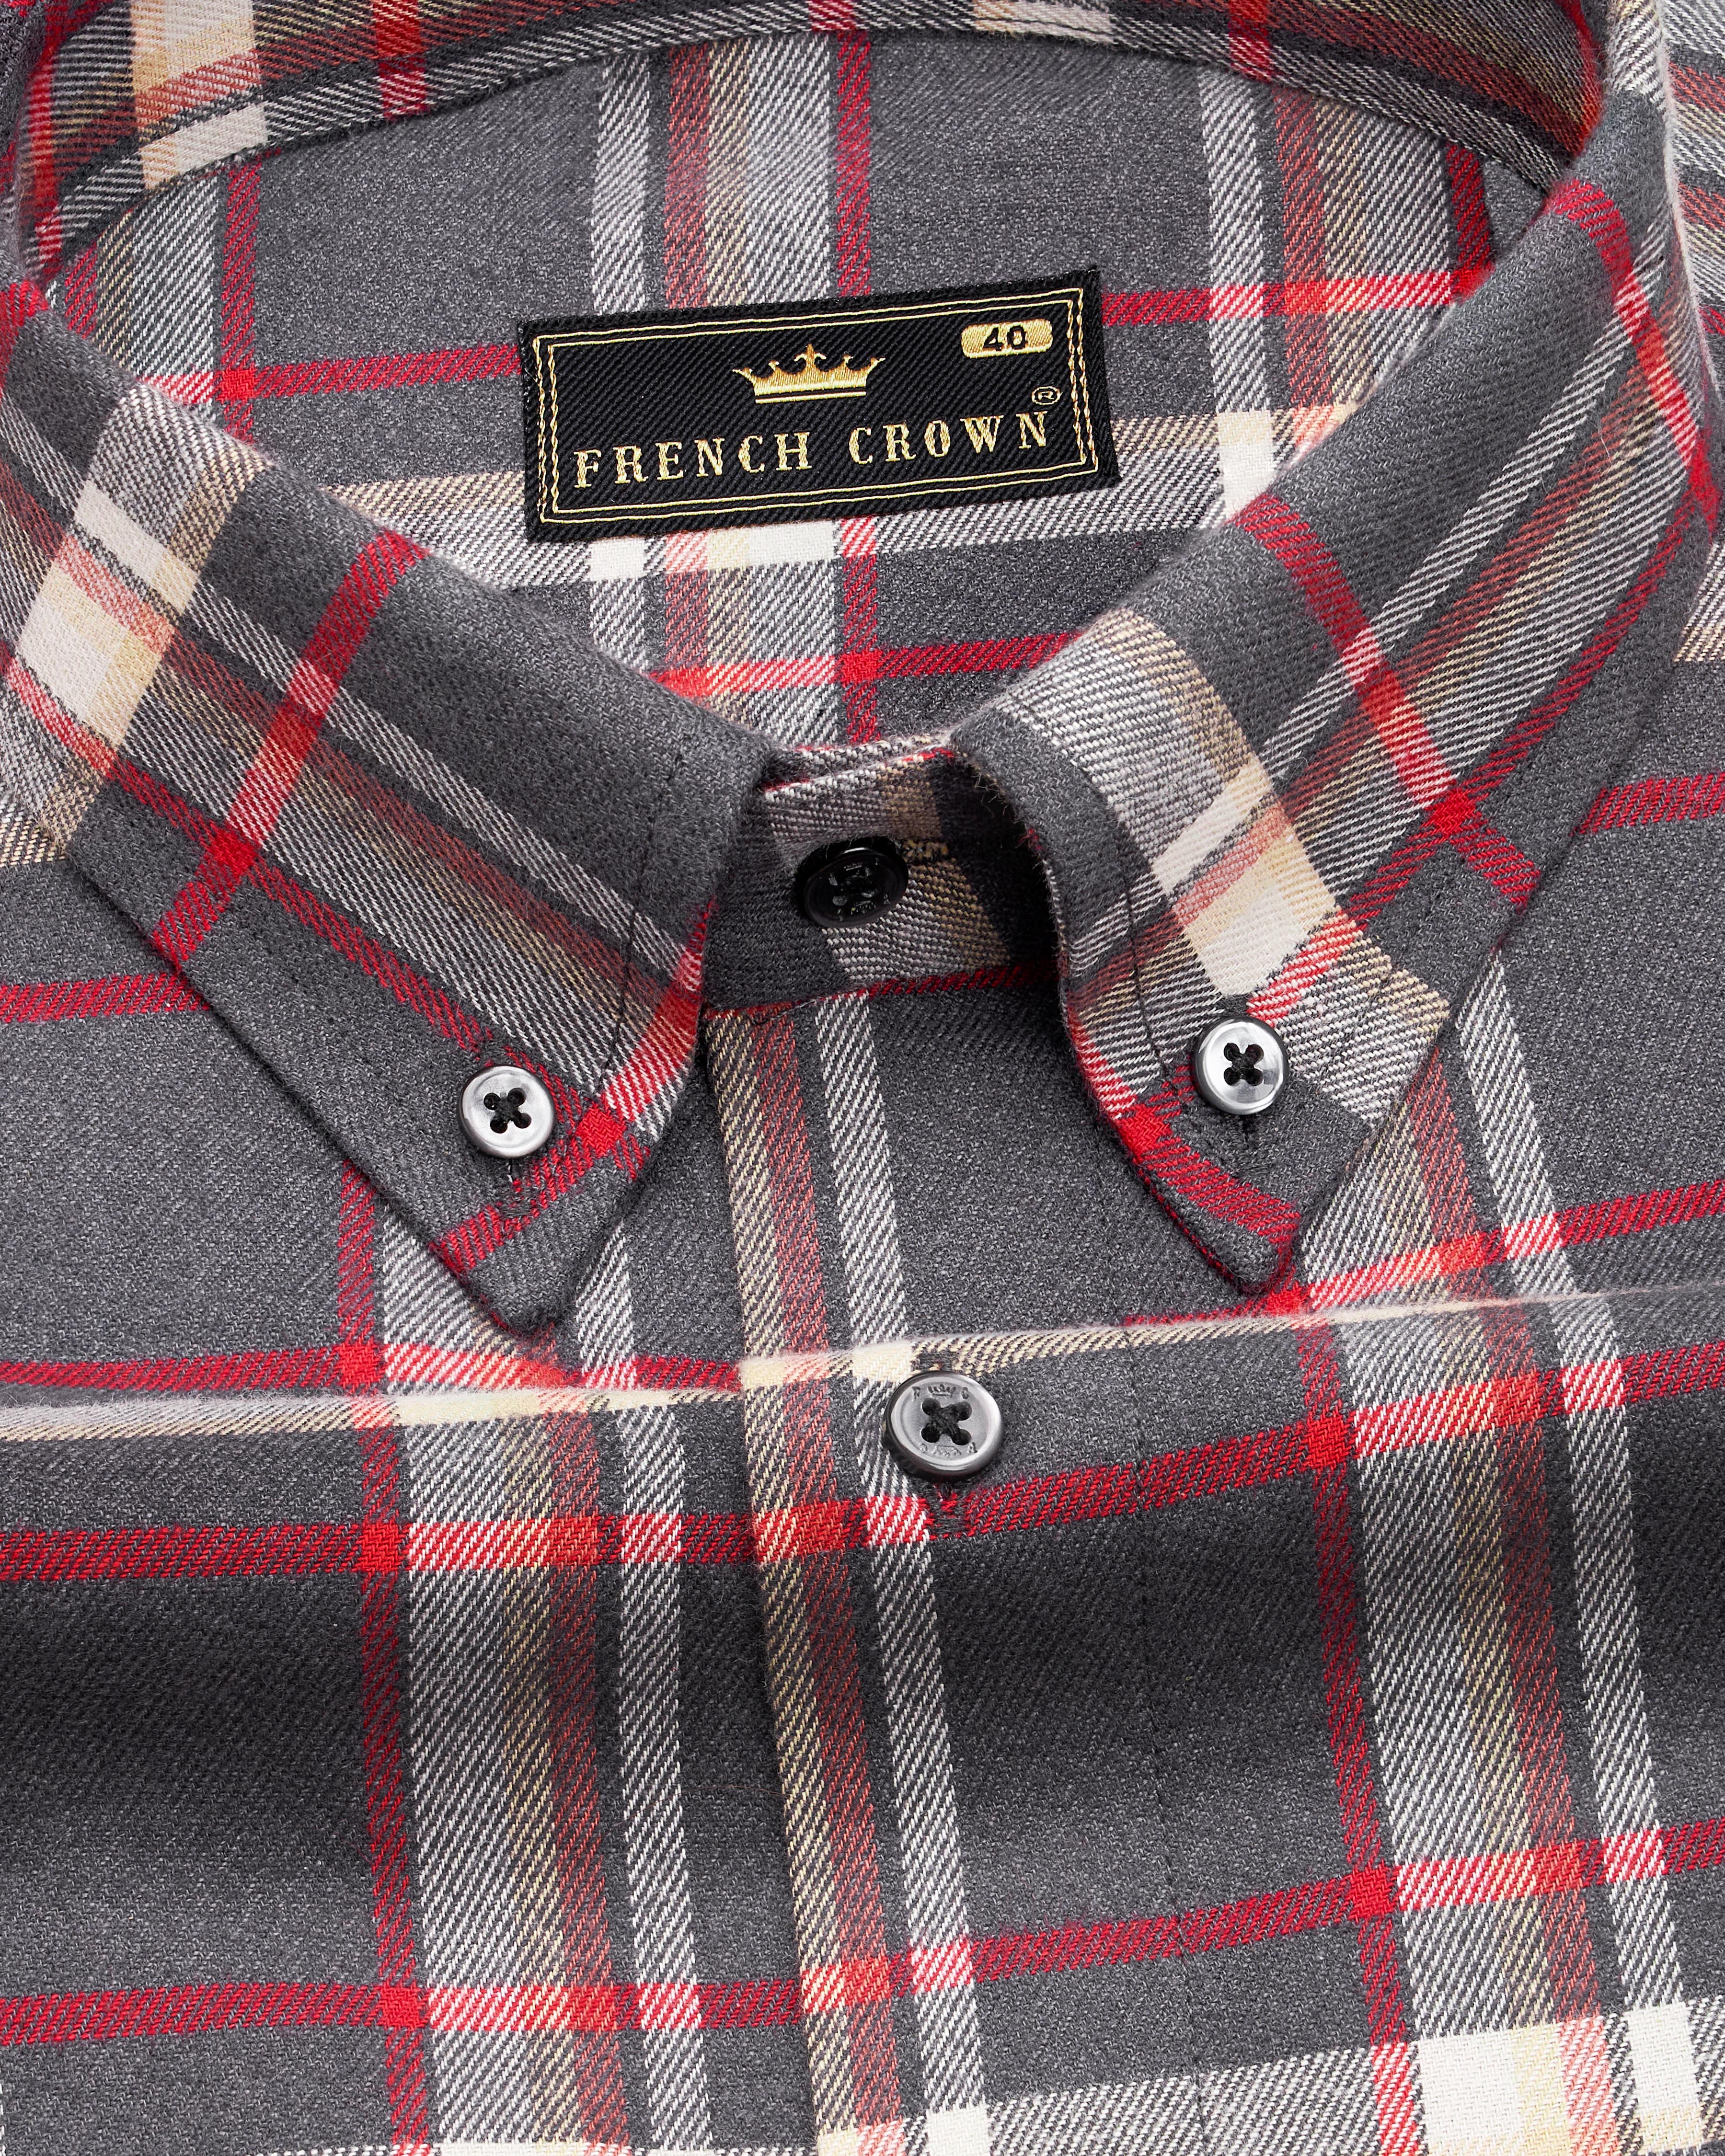 Ironside Gray with off White and Shiraz Red Plaid Flannel Shirt 9226-BD-BLK-38,9226-BD-BLK-H-38,9226-BD-BLK-39,9226-BD-BLK-H-39,9226-BD-BLK-40,9226-BD-BLK-H-40,9226-BD-BLK-42,9226-BD-BLK-H-42,9226-BD-BLK-44,9226-BD-BLK-H-44,9226-BD-BLK-46,9226-BD-BLK-H-46,9226-BD-BLK-48,9226-BD-BLK-H-48,9226-BD-BLK-50,9226-BD-BLK-H-50,9226-BD-BLK-52,9226-BD-BLK-H-52